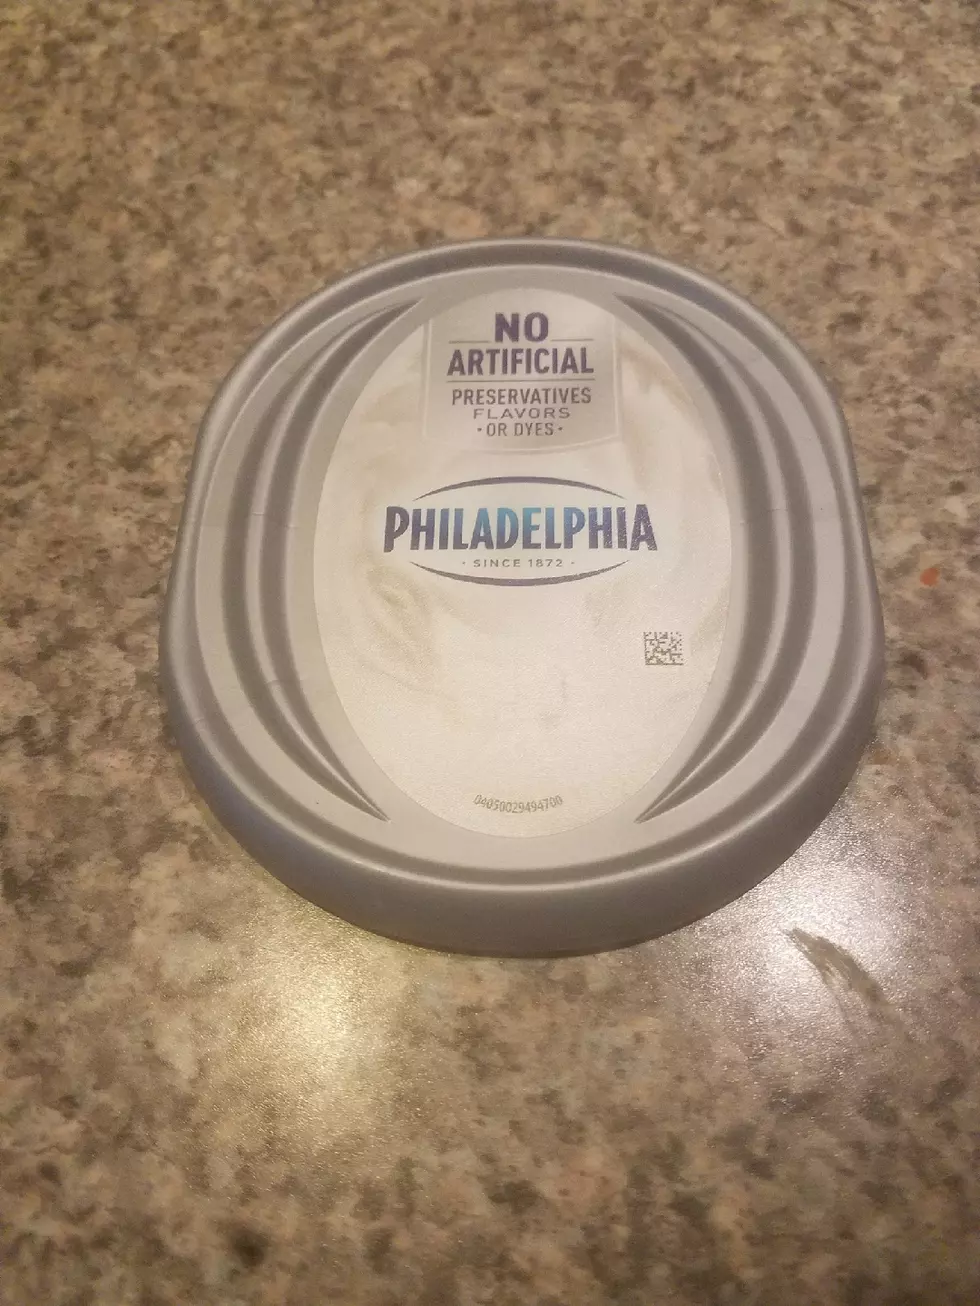 Patriots Fans LOL Over Name Of Philadelphia Cream Cheese Owners